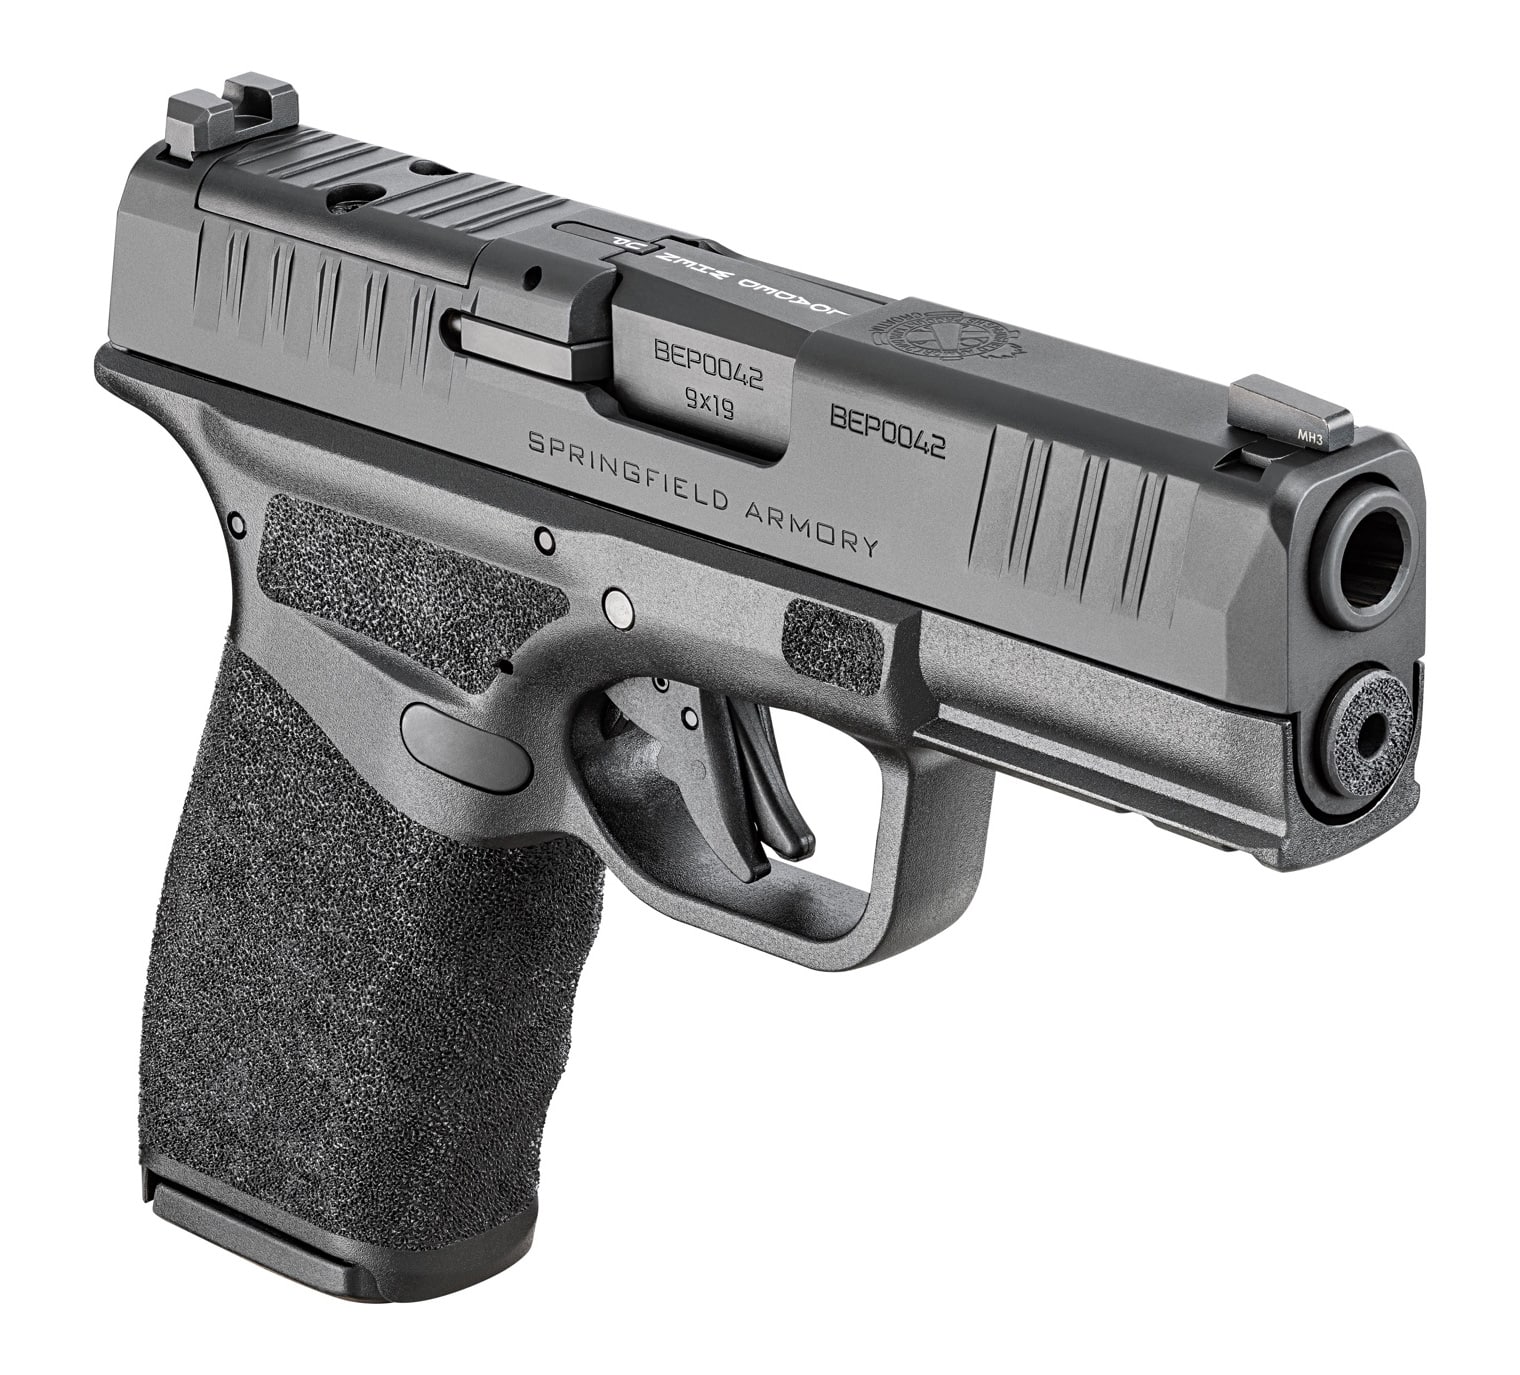 In this photo is a California compliant Springfield Armory Hellcat Pro 9mm pistol.